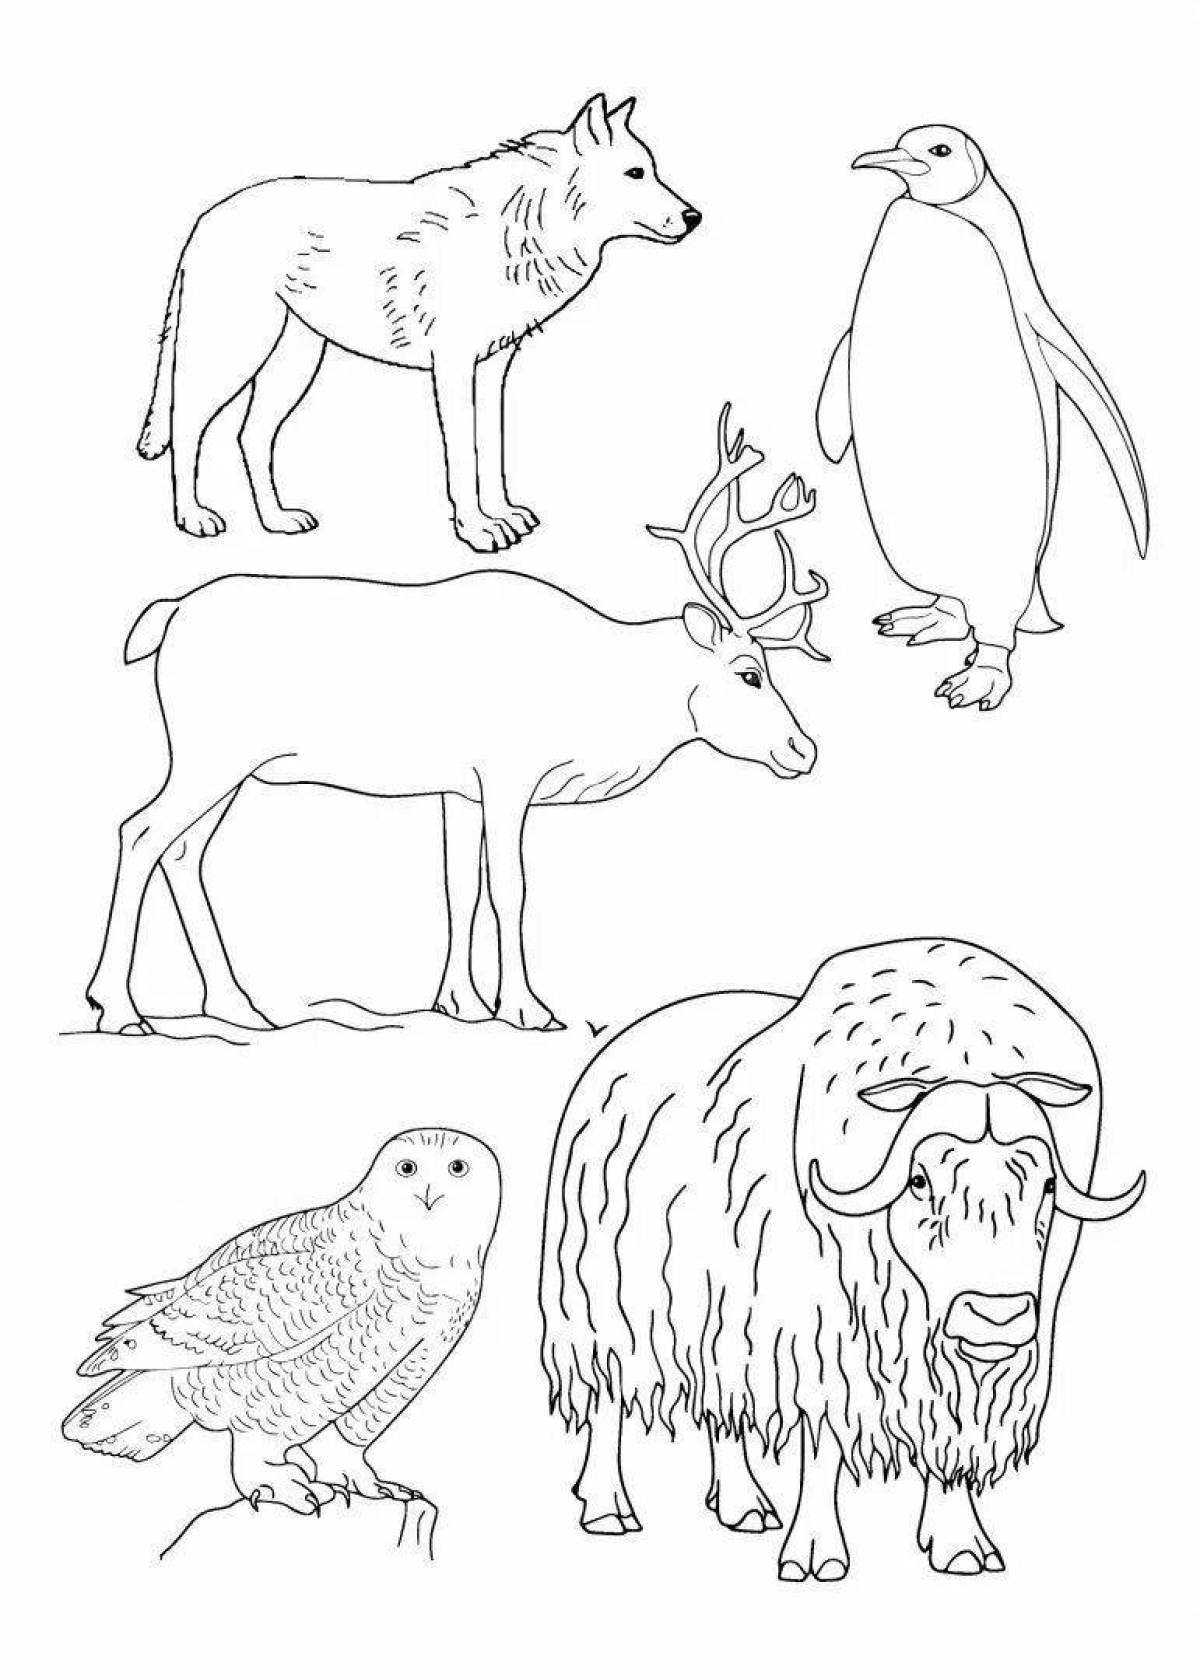 Fun coloring of northern animals